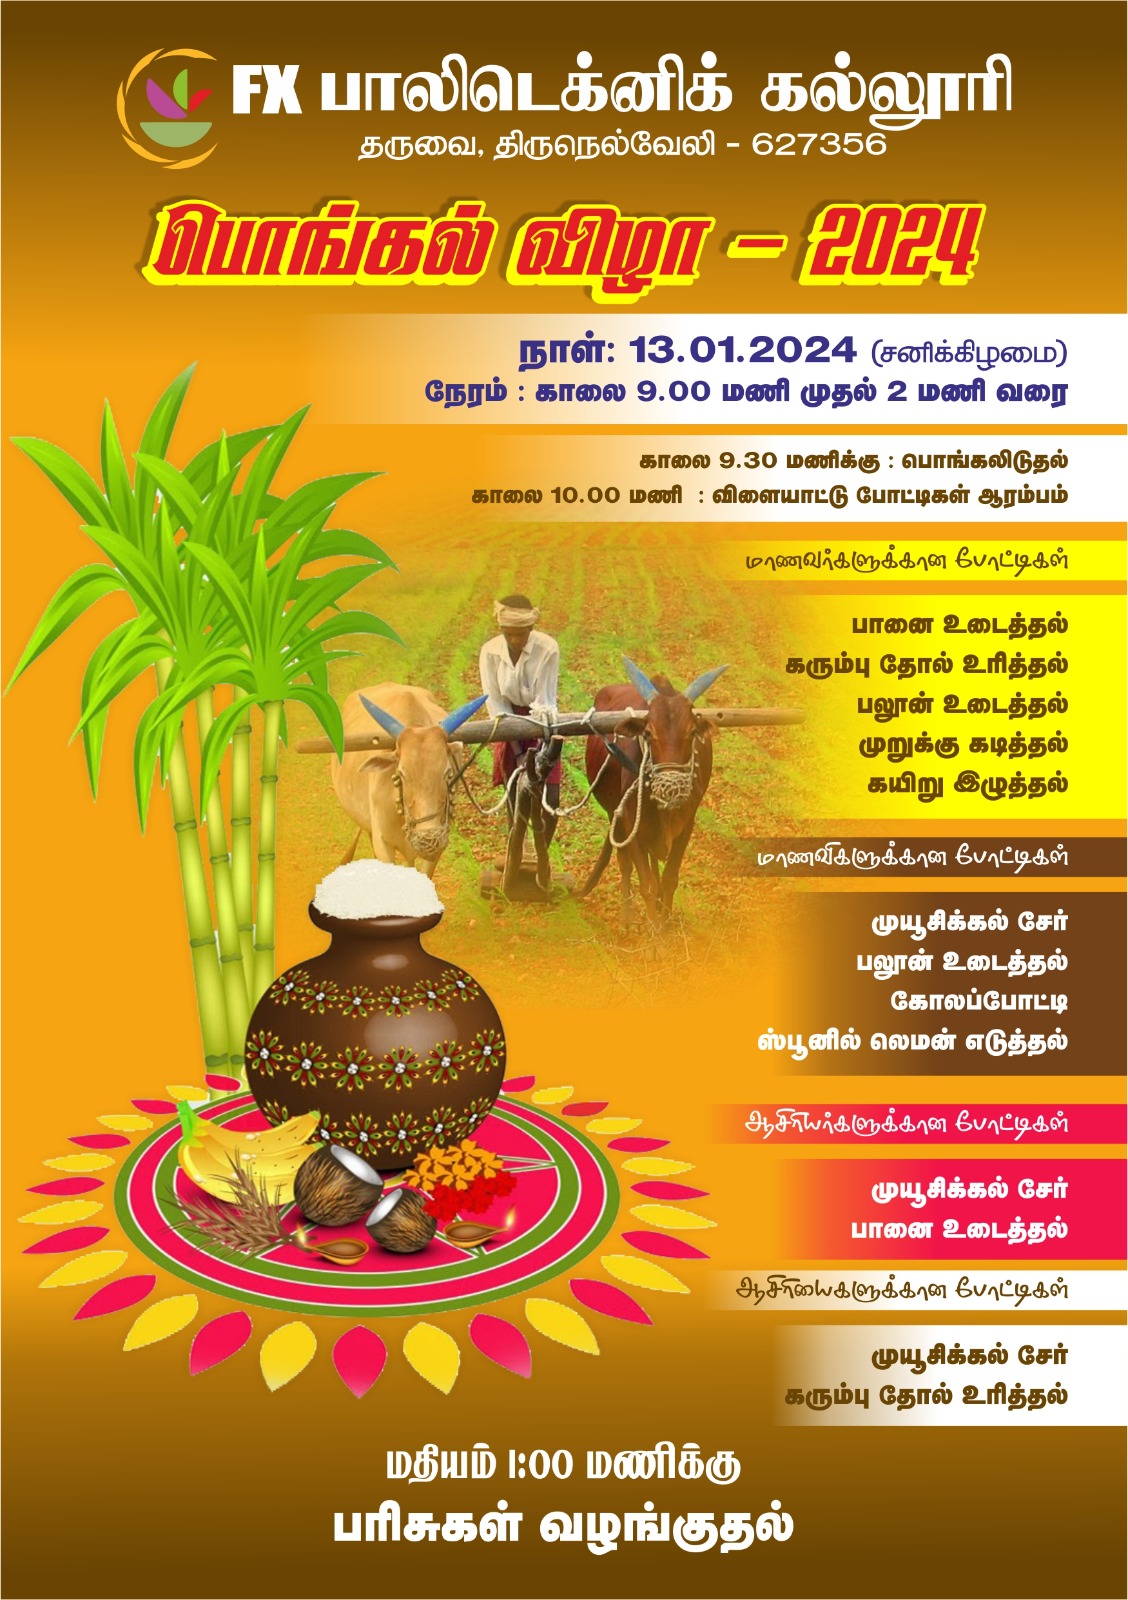 PONGAL FUNCTION